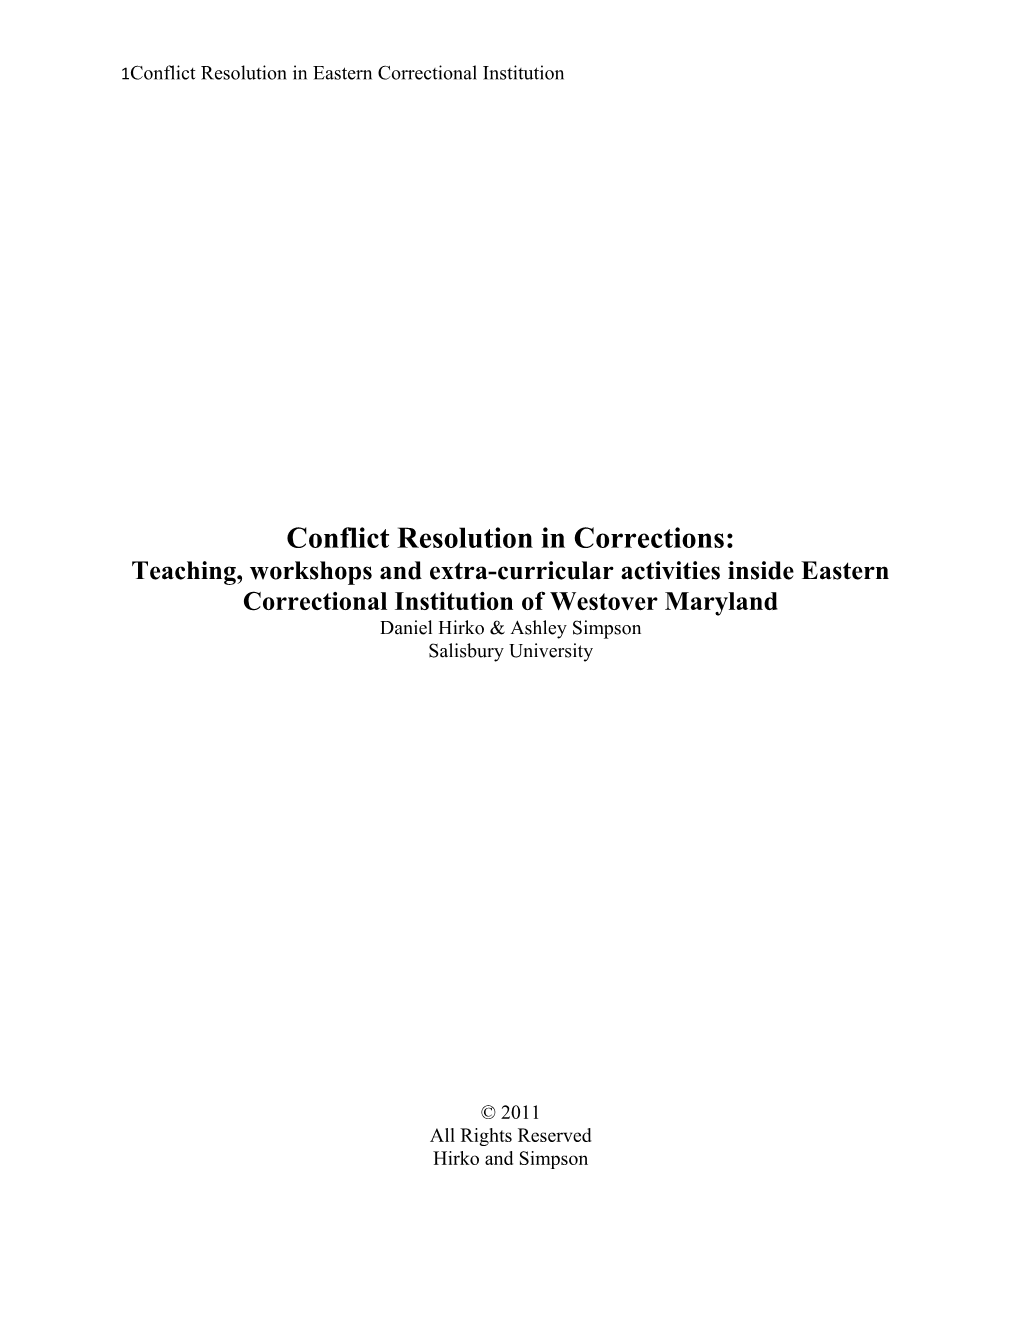 Conflict Resolution in Corrections